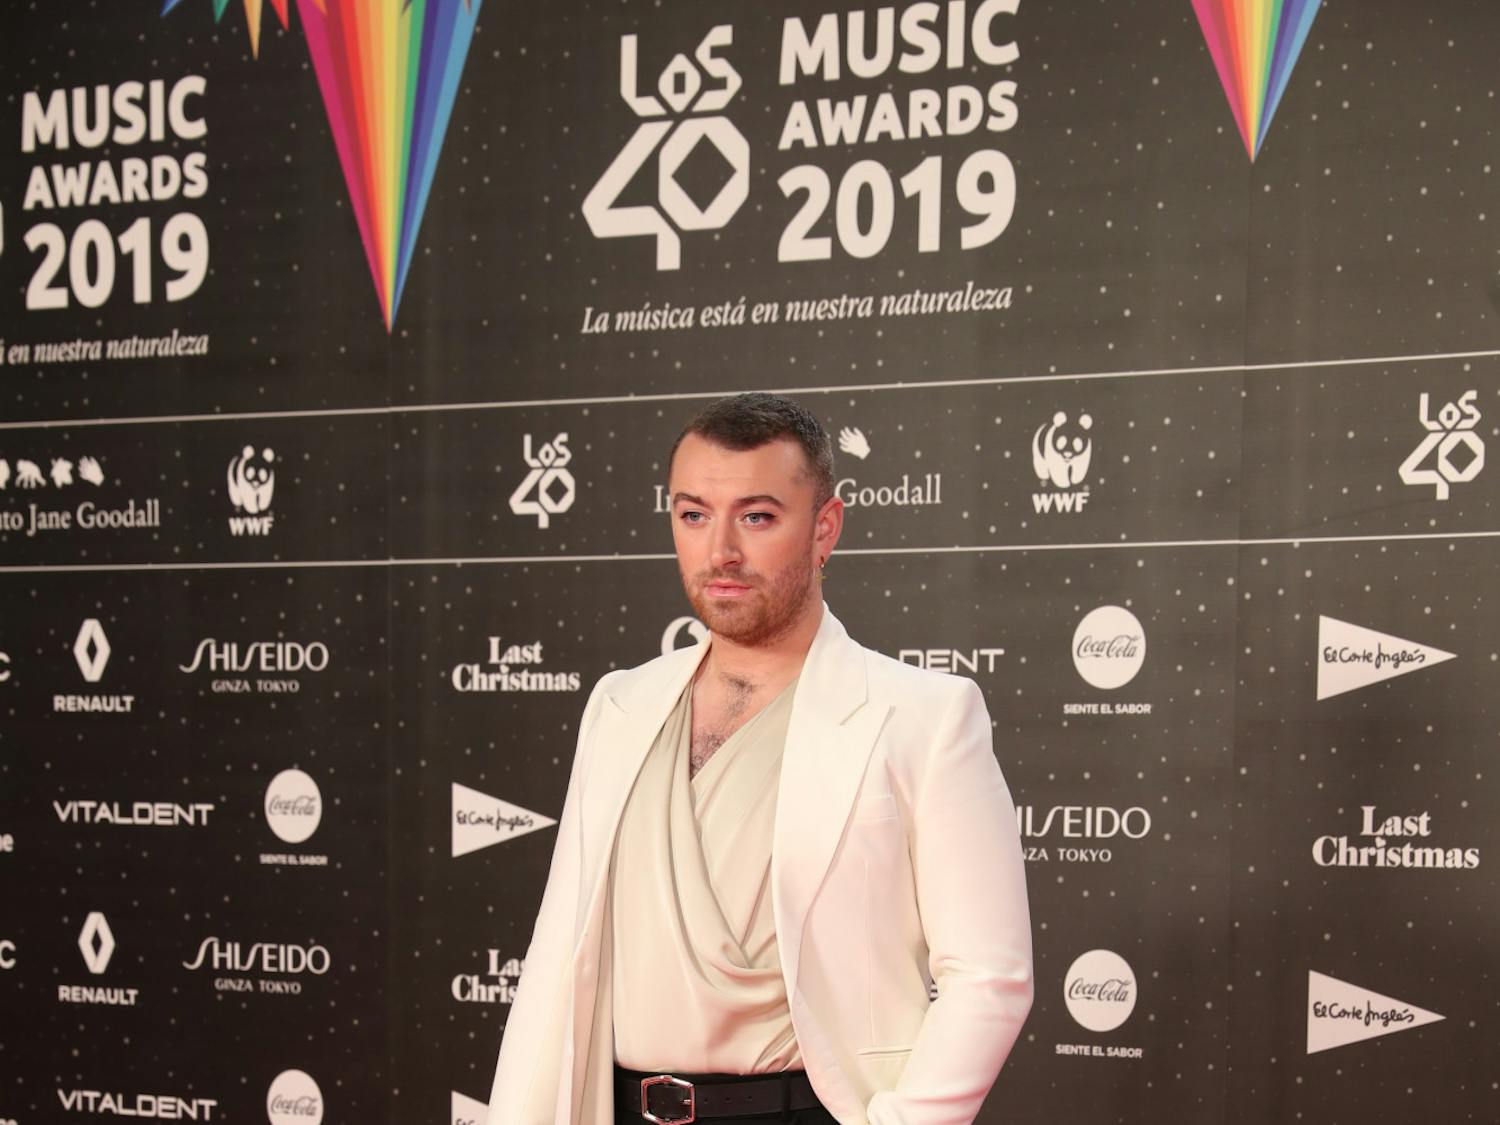 Petras and Smith made history at the 65th Grammy Awards for the LGBTQ+ community. (Photo courtesy of Flickr / SER Communicación, Nov. 8, 2019)